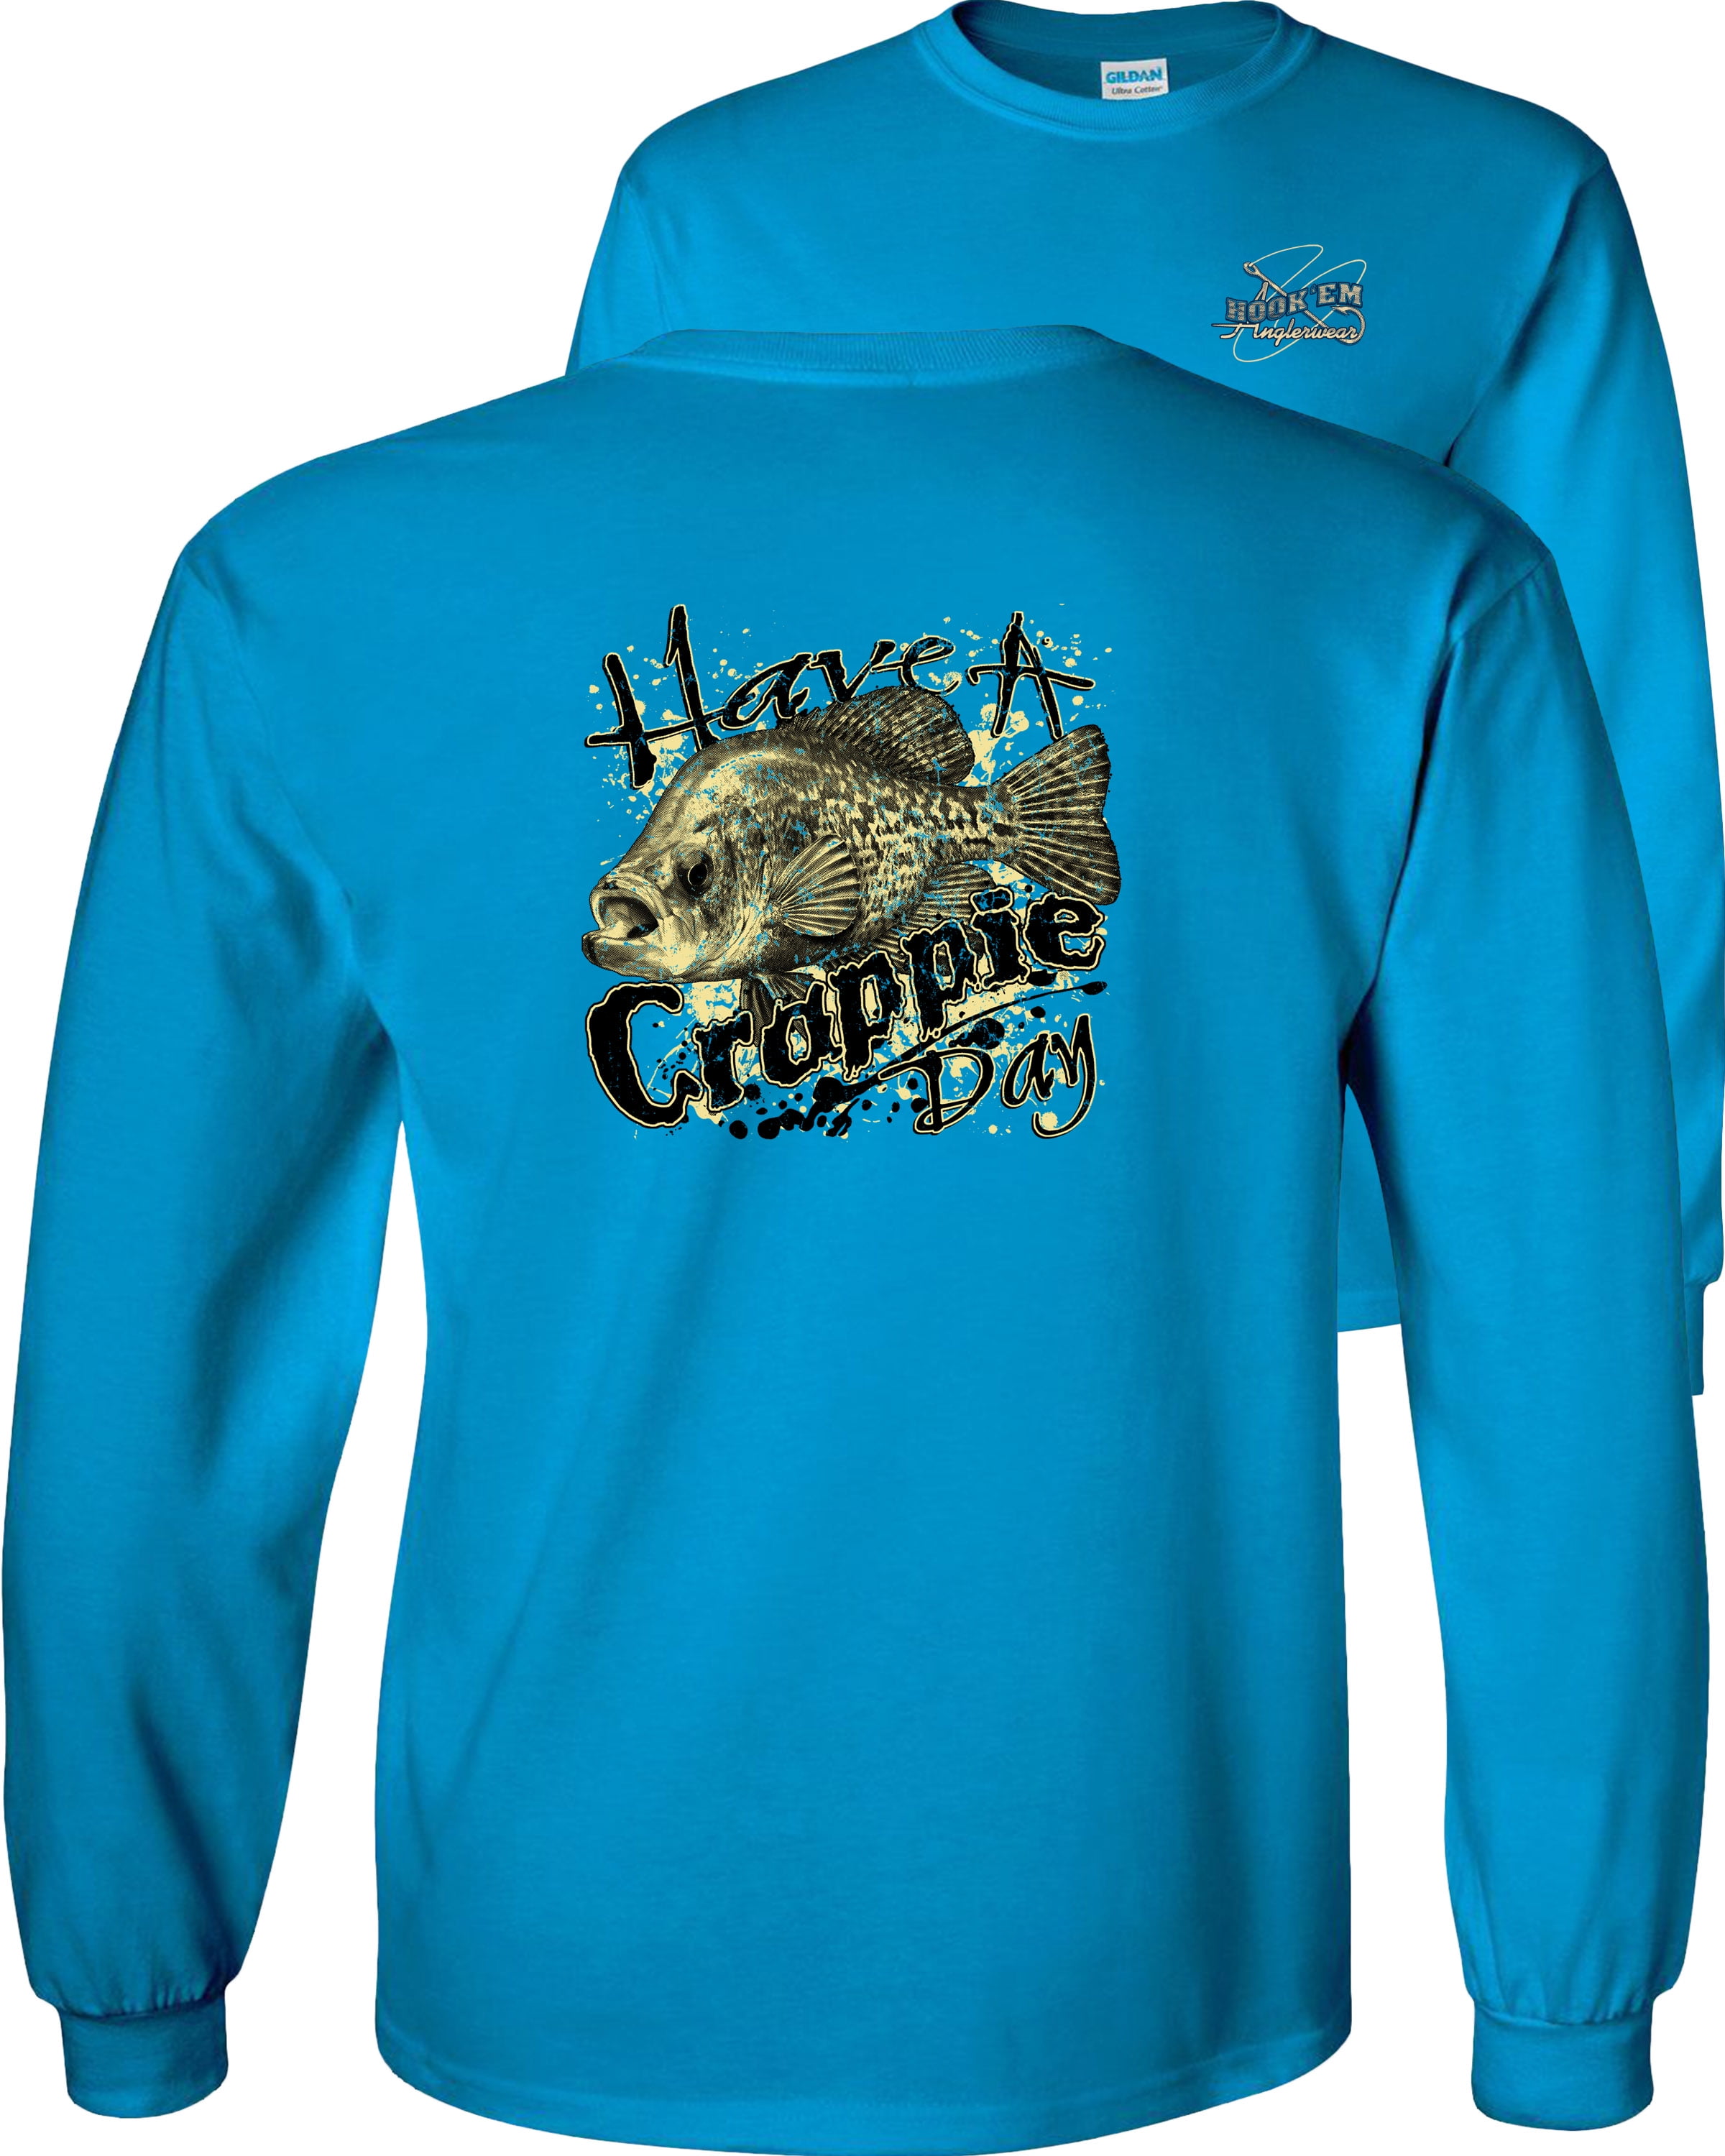 Have A Crappie Day Fishing Long Sleeve T-Shirt